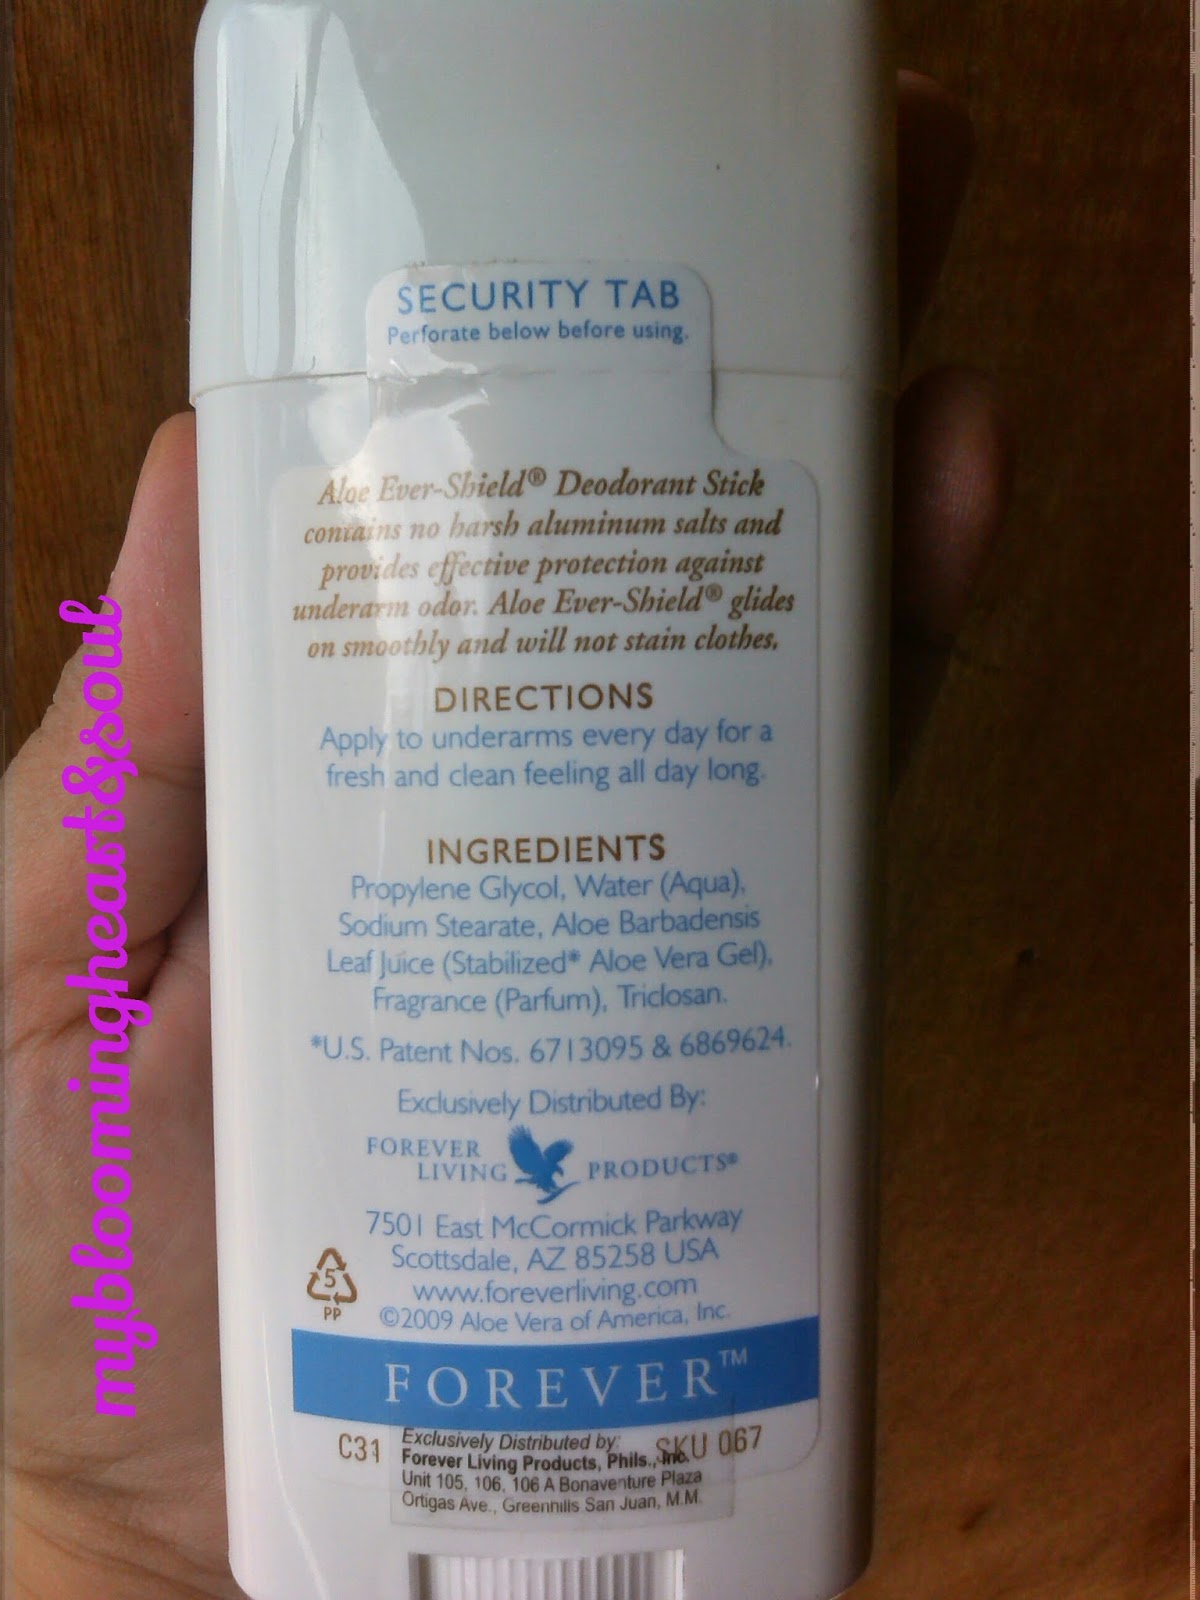 Bør Peep konvergens Review: Aloe Ever Shield Deodorant Stick - My Blooming Heart and Soul